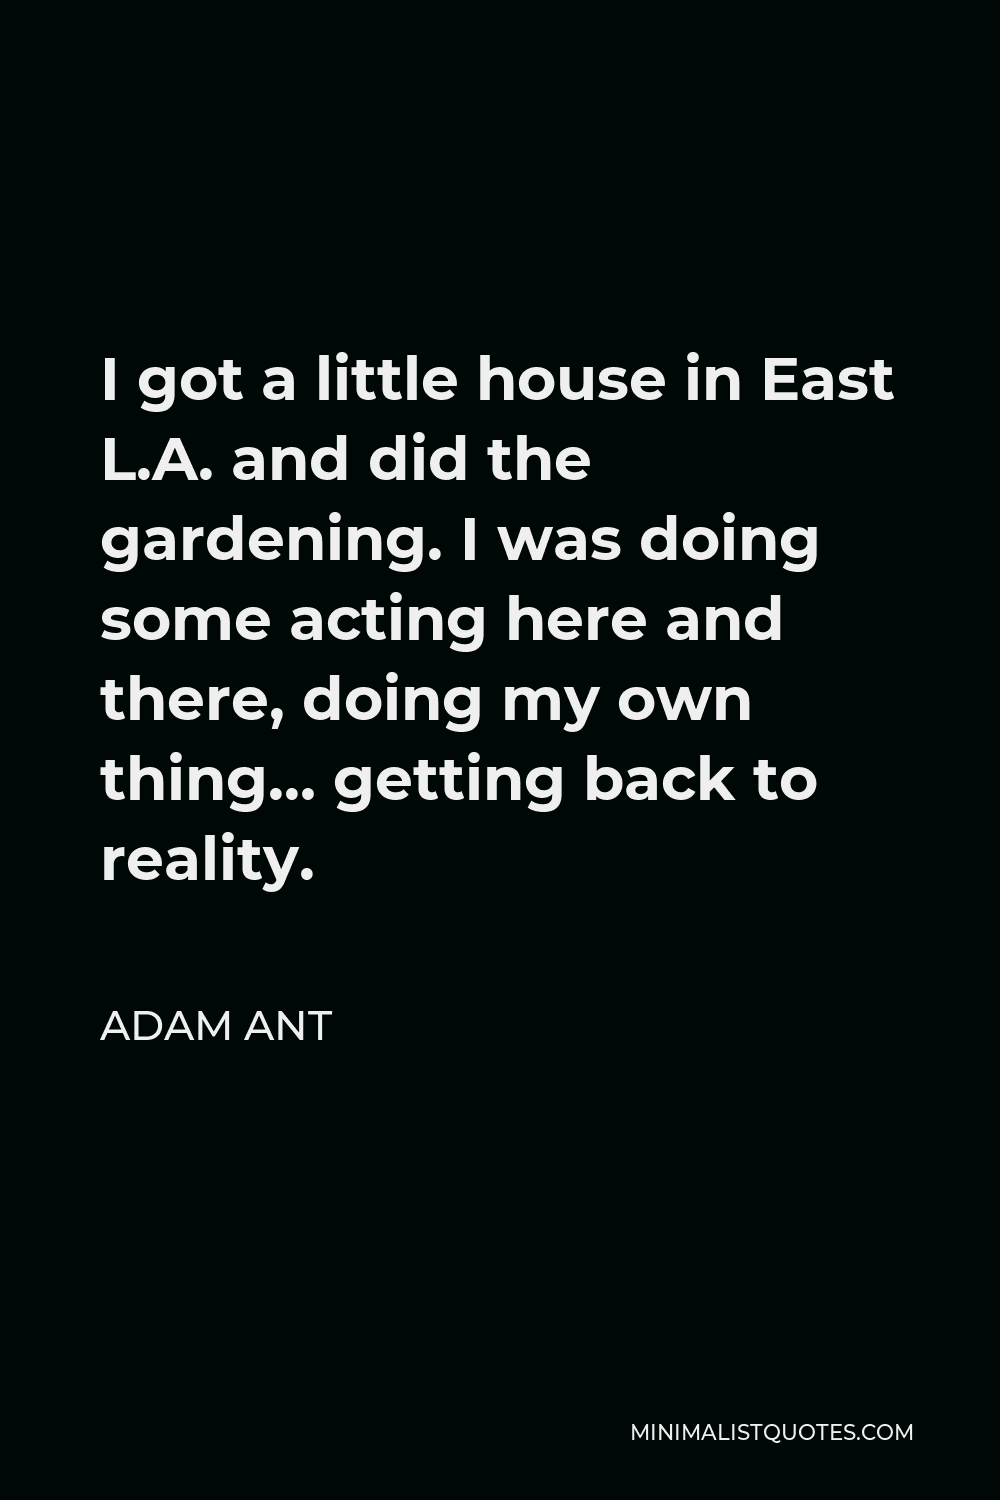 Adam Ant Quote - I got a little house in East L.A. and did the gardening. I was doing some acting here and there, doing my own thing… getting back to reality.